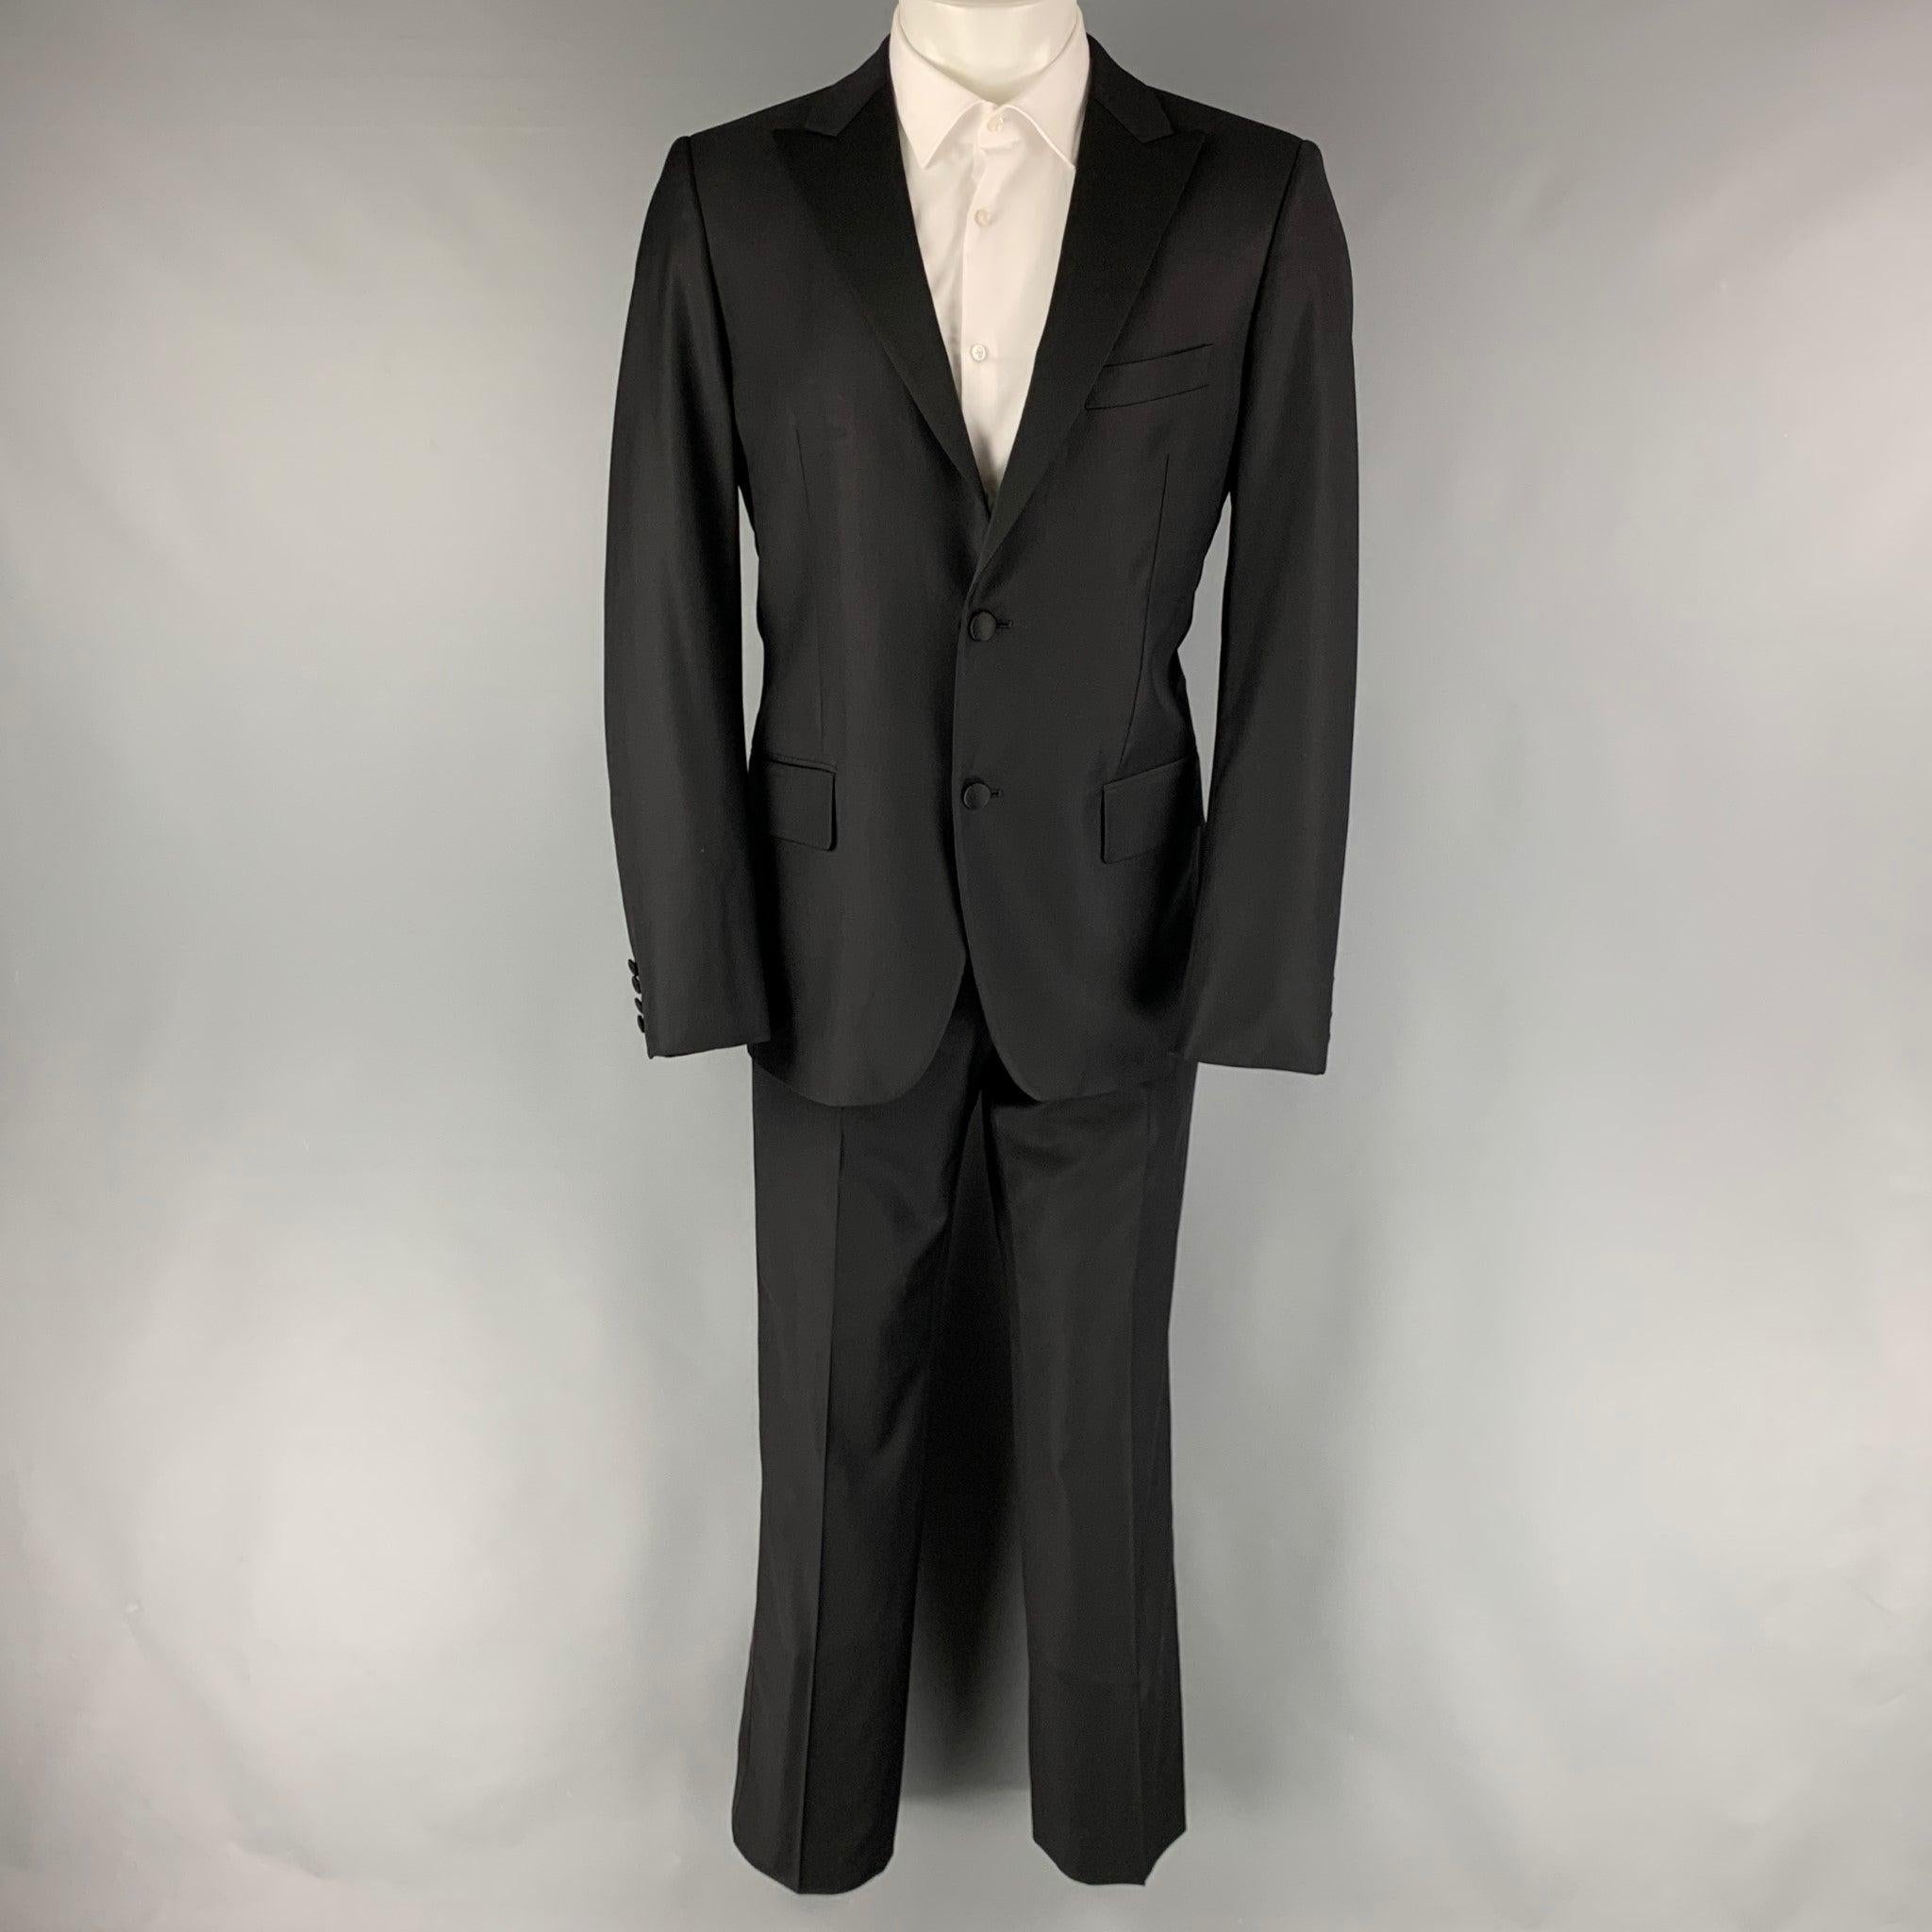 CALVIN KLEIN COLLECTION tuxedo comes in a black wool with a full liner and includes a single breasted, two buttons sport coat with a peak lapel and matching flat front trousers. Excellent Pre-Owned Condition. 

Marked:   48 

Measurements: 
 